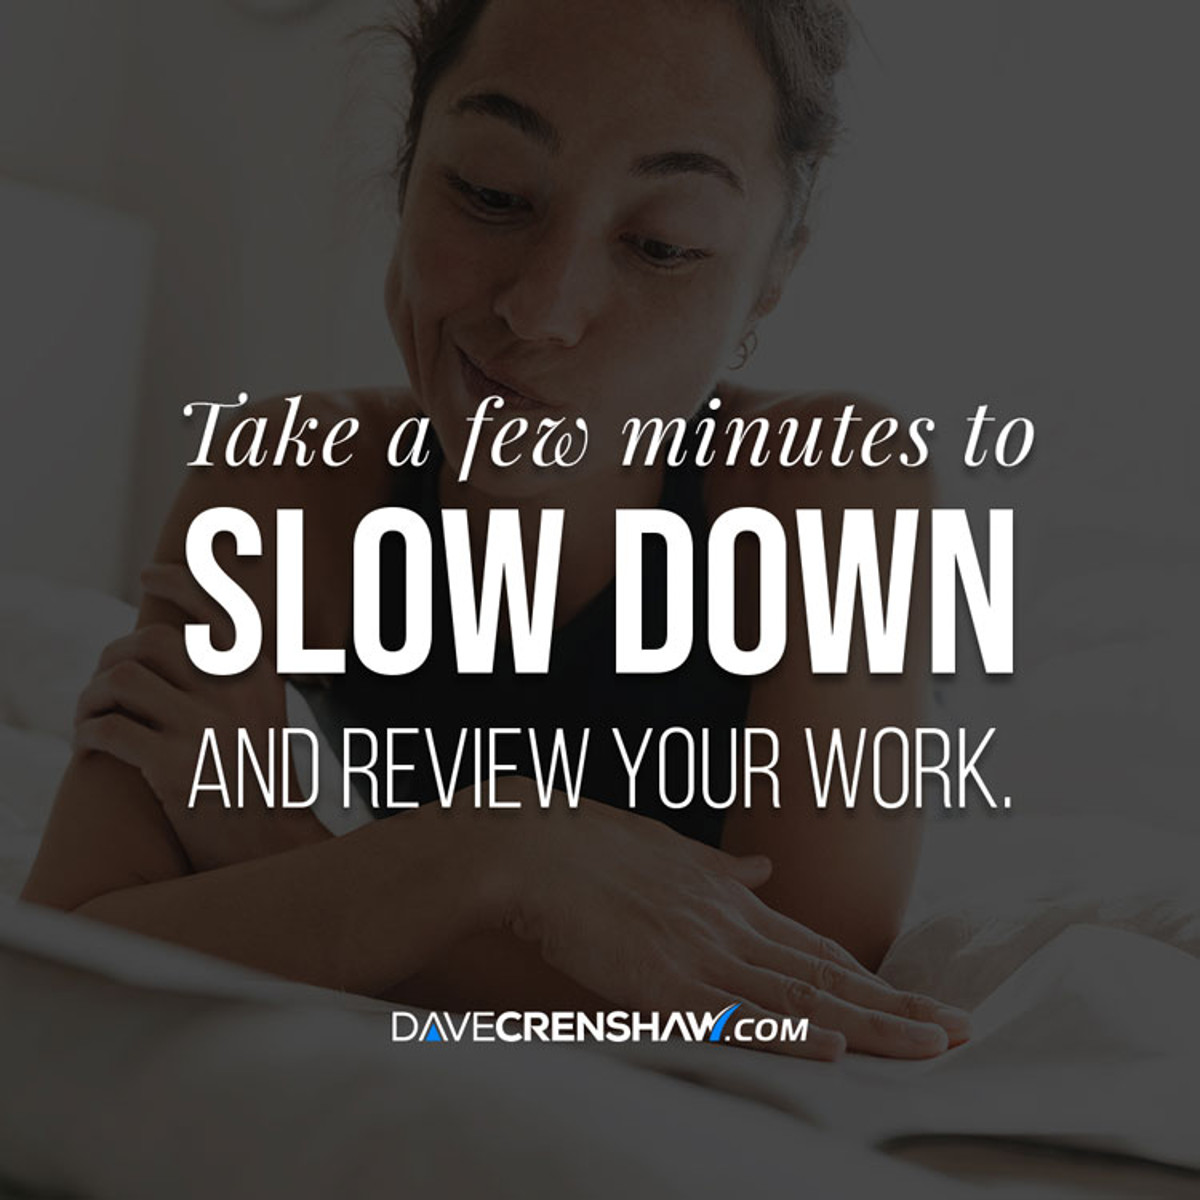 Slow down and review your work to reduce mistakes